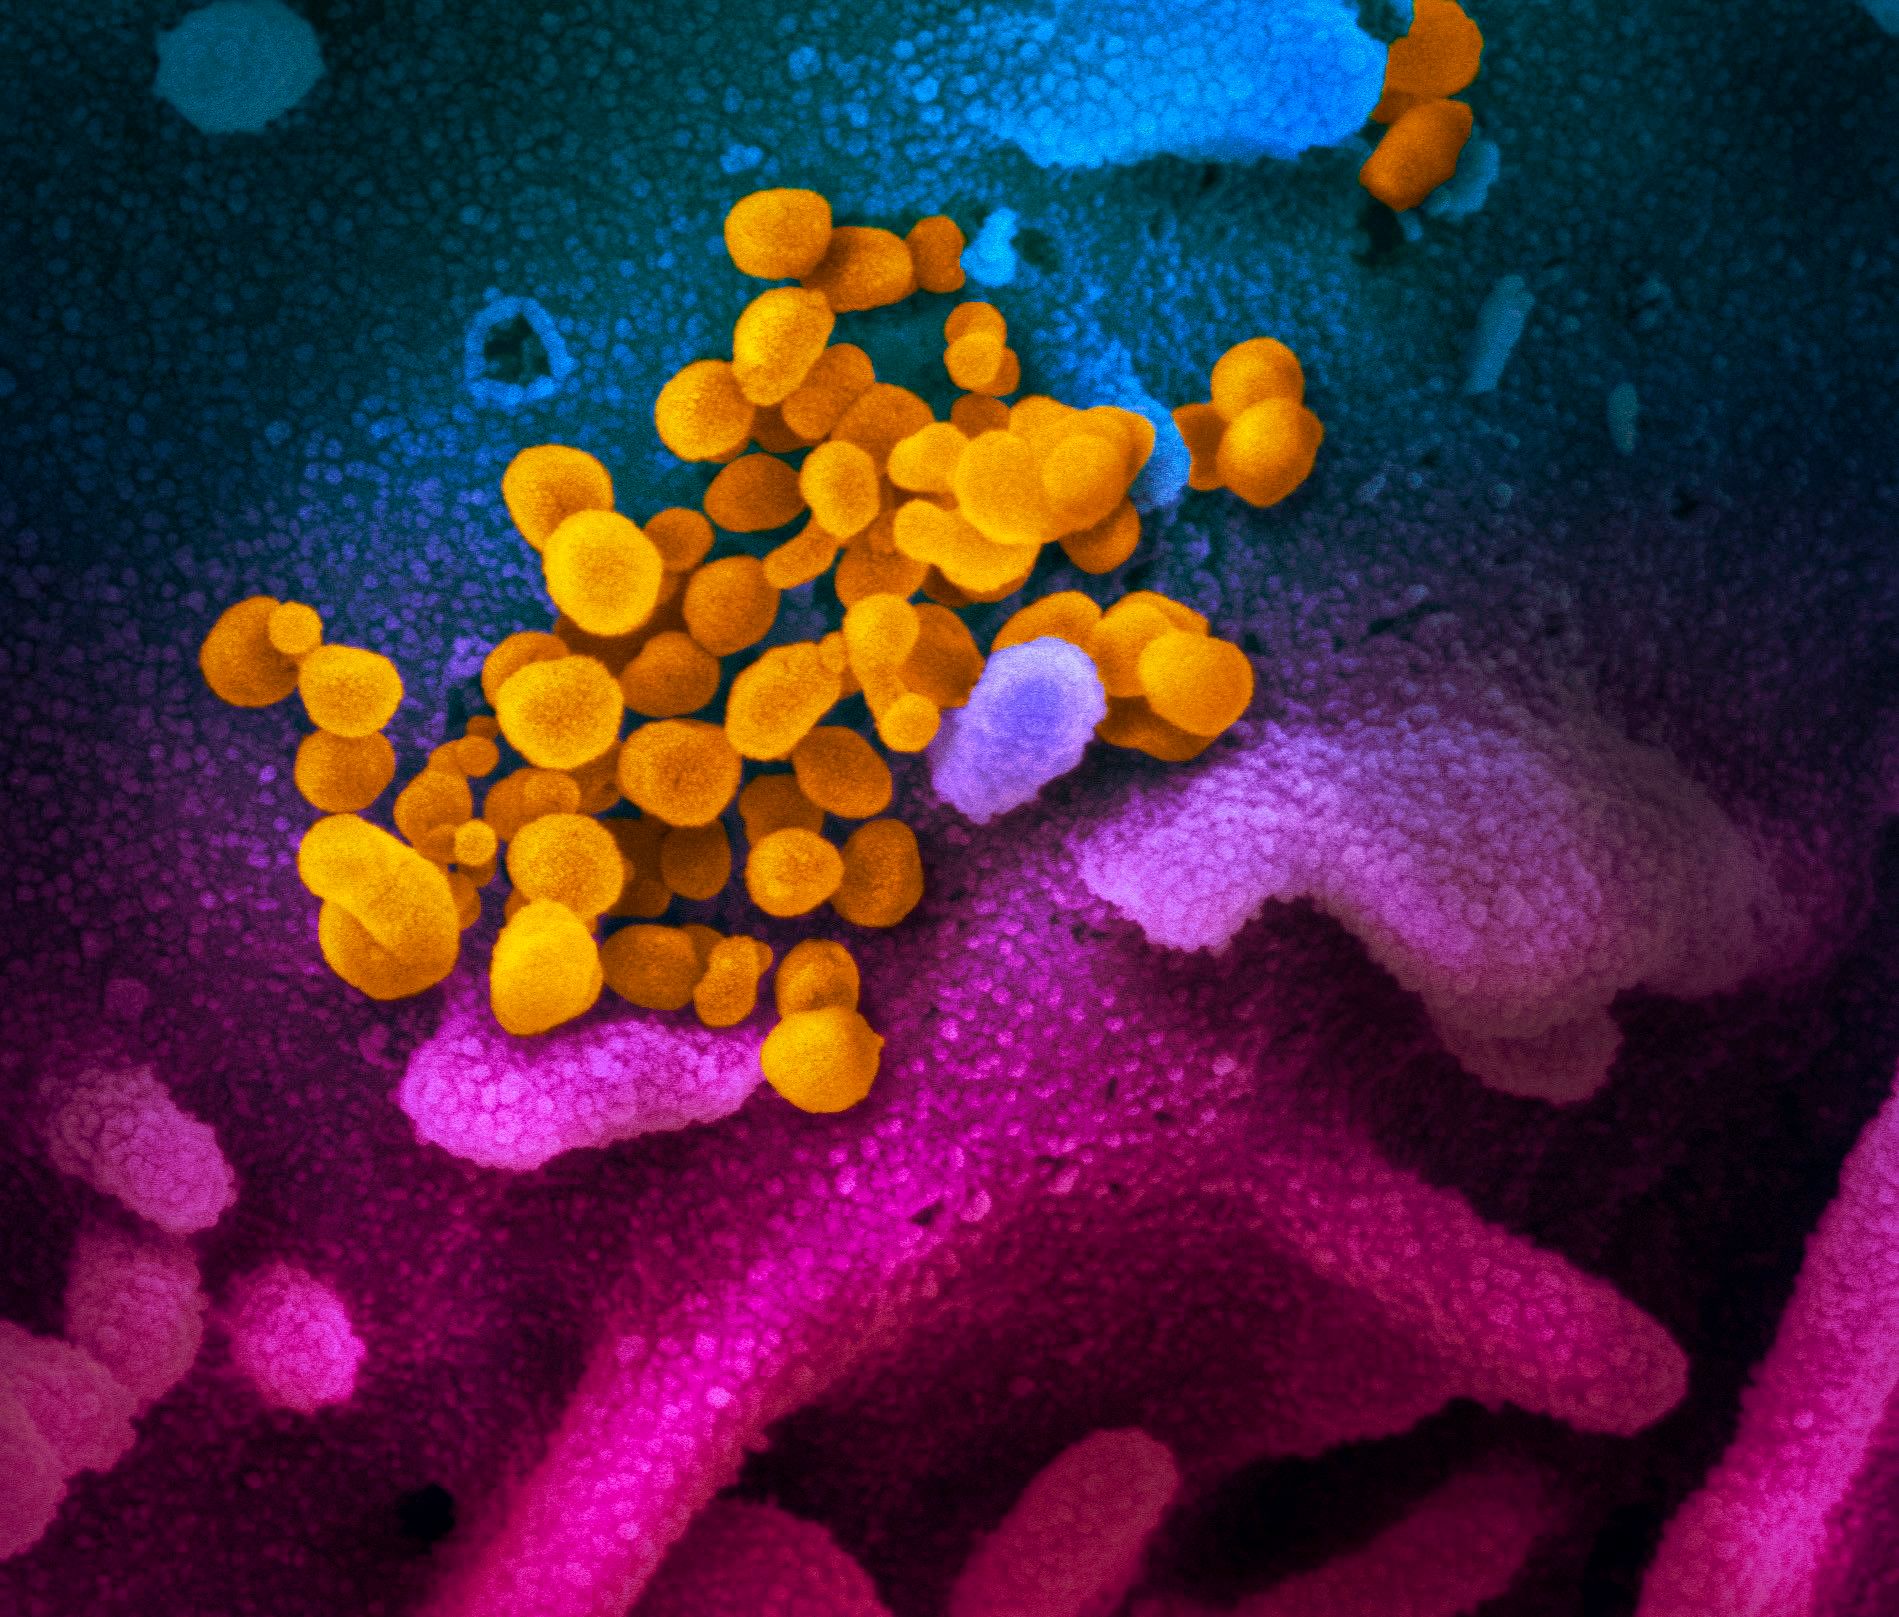 In this file handout illustration image obtained February 27, 2020 courtesy of the National Institutes of Health taken with a scanning electron microscope shows SARS-CoV-2 (yellow)—also known as 2019-nCoV, the virus that causes COVID-19—isolated from a patient in the US, emerging from the surface of cells (blue/pink) cultured in the lab. - The US biotech firm Inovio reported preliminary but encouraging results June 30, 2020 from tests of an experimental coronavirus vaccine. Administered to 40 volunteers, it triggered an immune system response in 94 percent of those who completed the so-called phase one clinical trial, meaning they received two injections, four weeks apart.Inovio's vaccine, called INO-4800, is designed to inject DNA into a person so as to set off a specific immune system response against the SARS-CoV-2 virus. (Photo by Handout / National Institutes of Health / AFP)